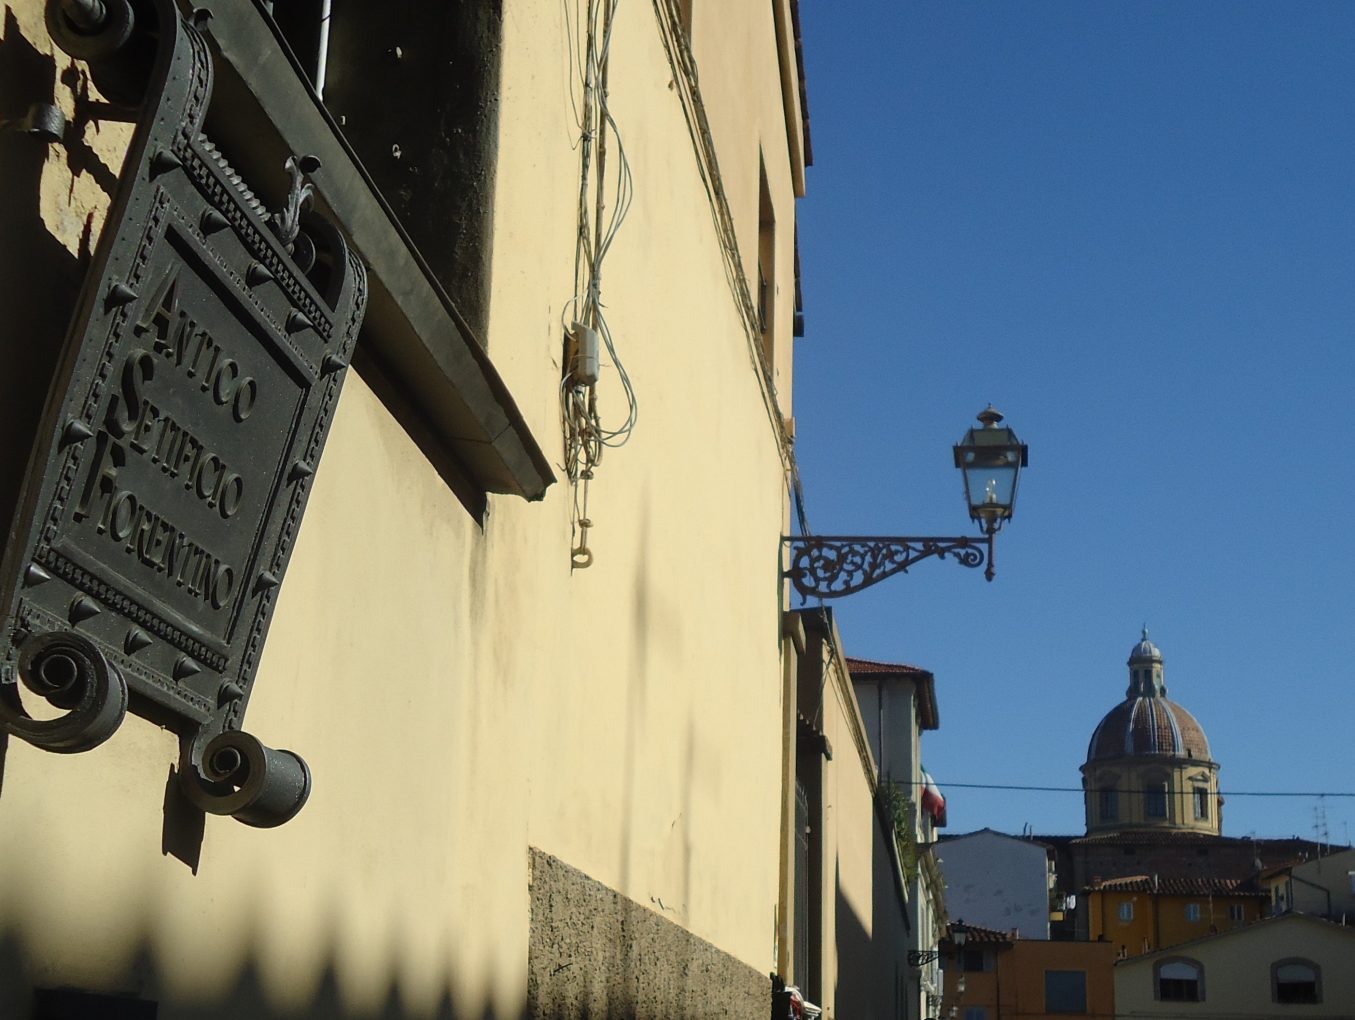 The Fabric of Time: Antico Setificio Fiorentino, Florence's oldest fabric mill